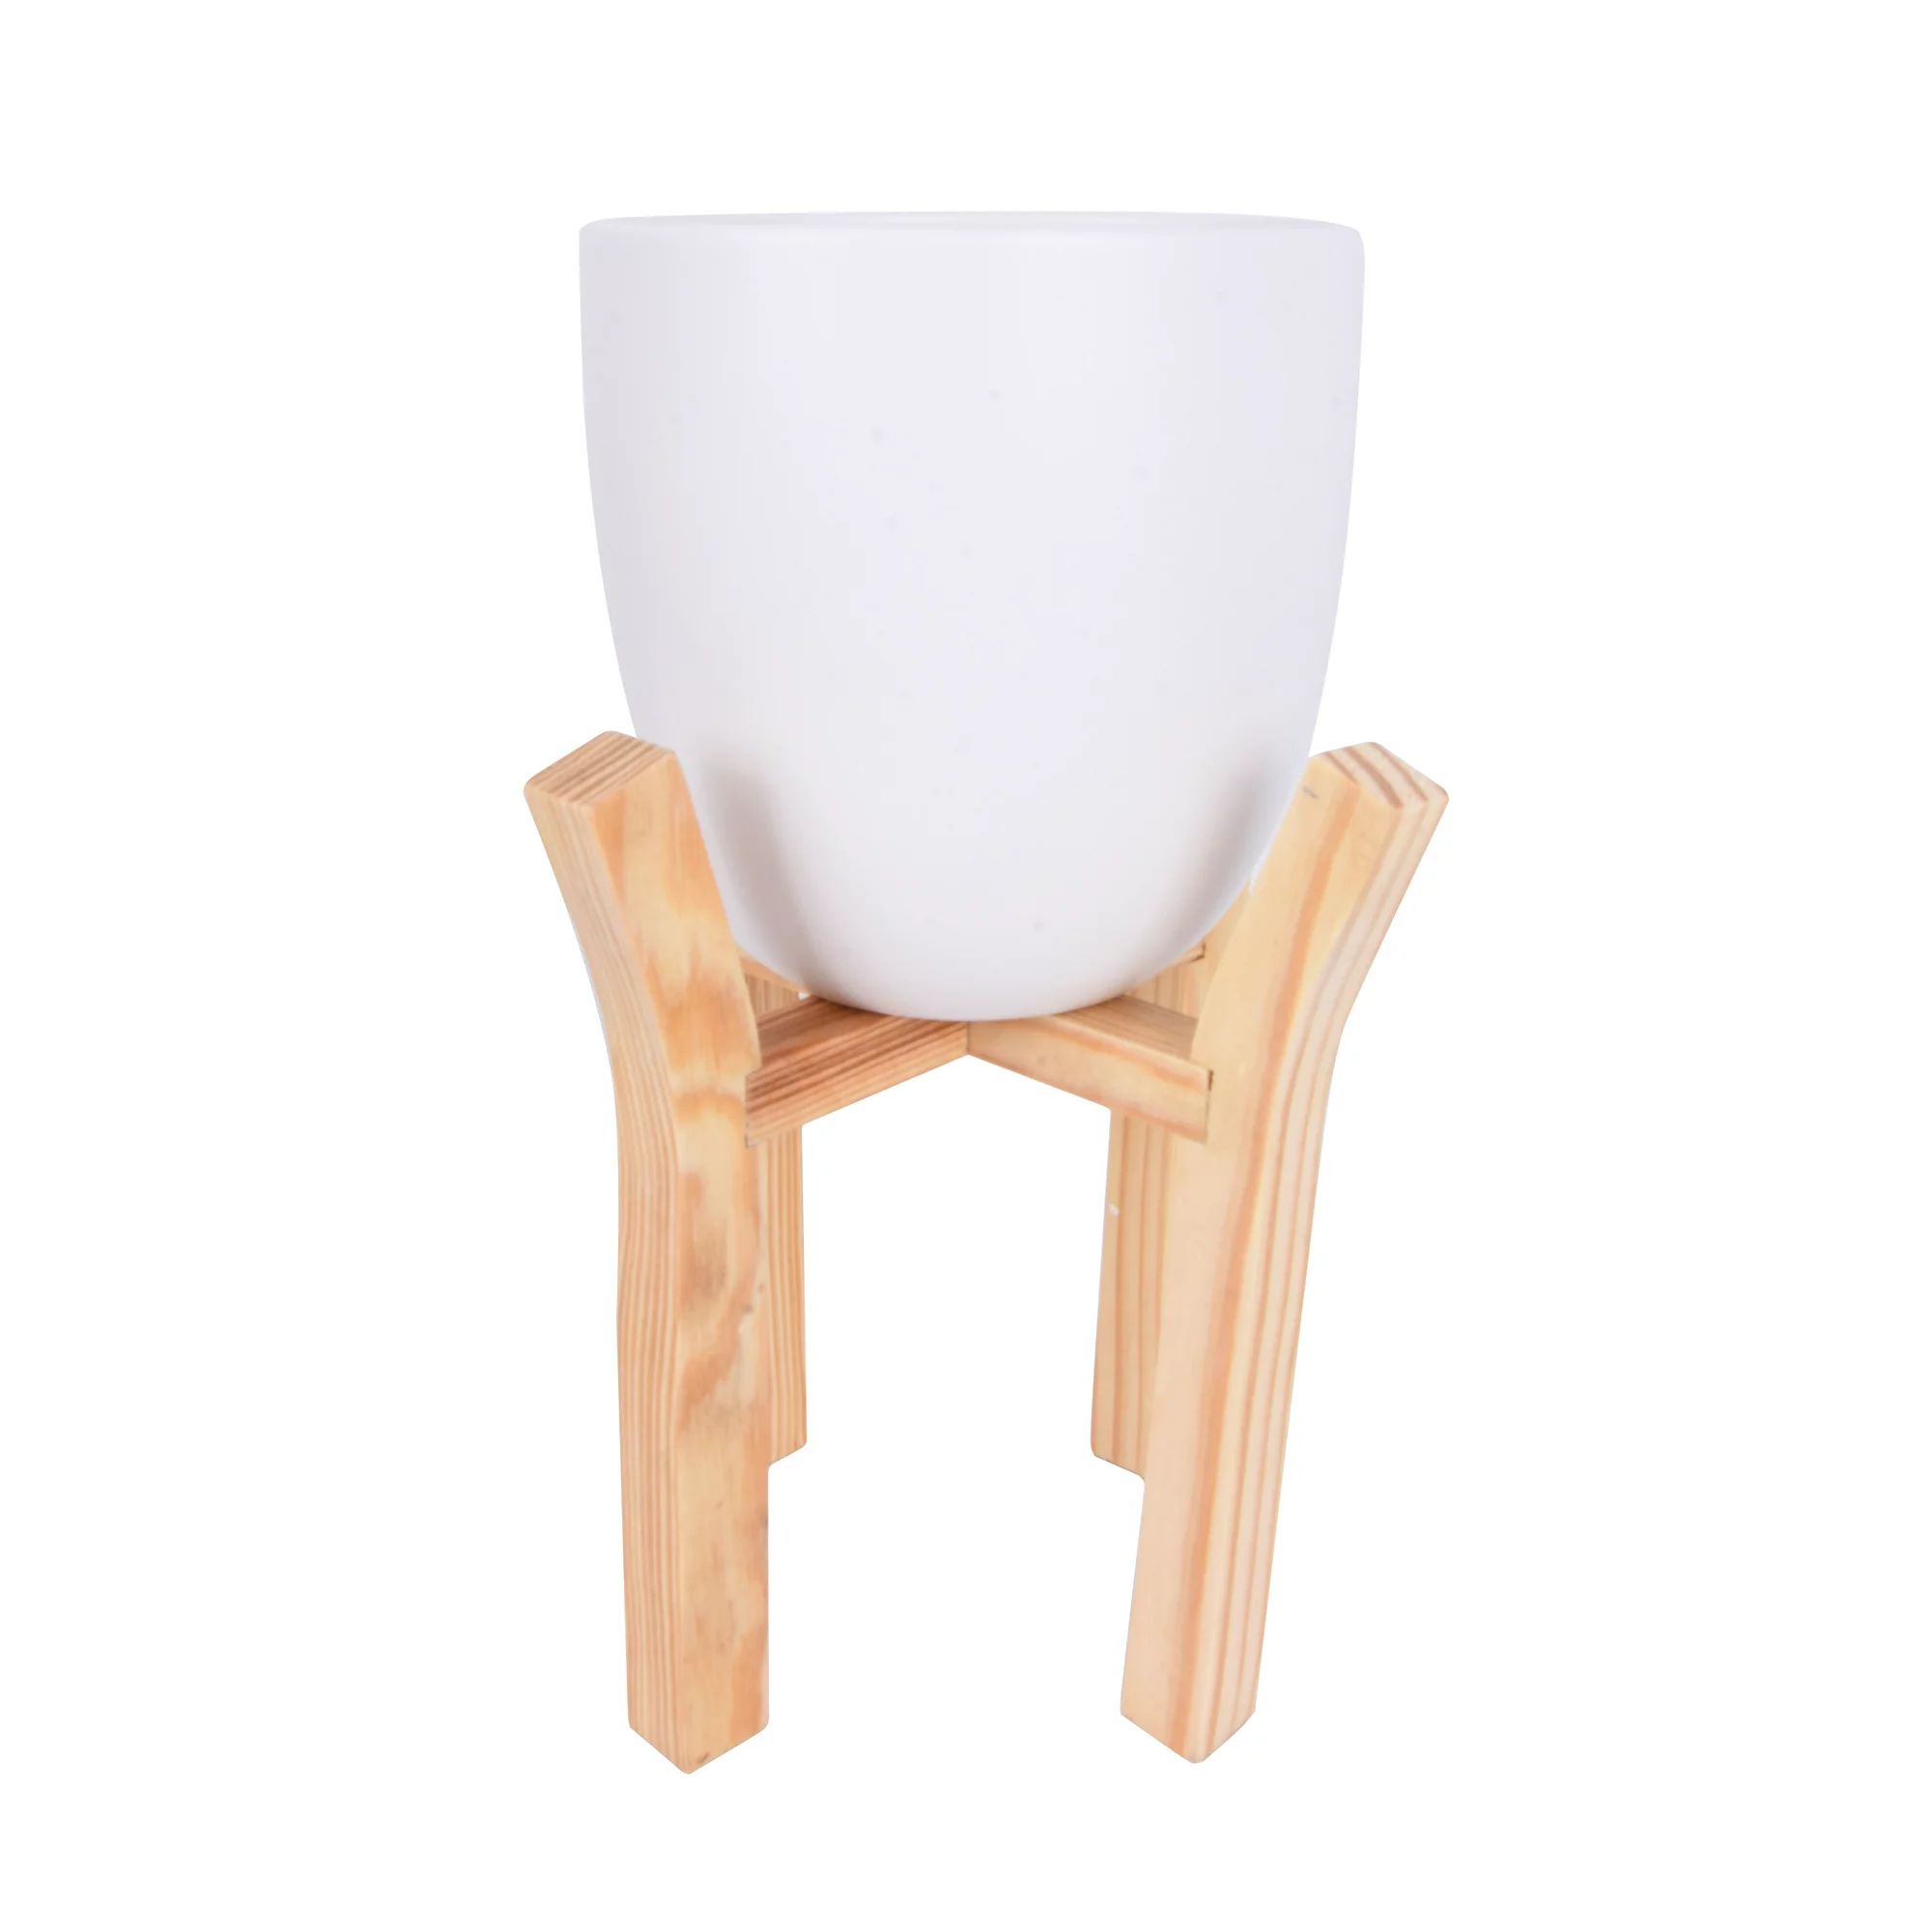 Mainstays White Ceramic Planter with Wood Stand, Set of 2 | Walmart (US)